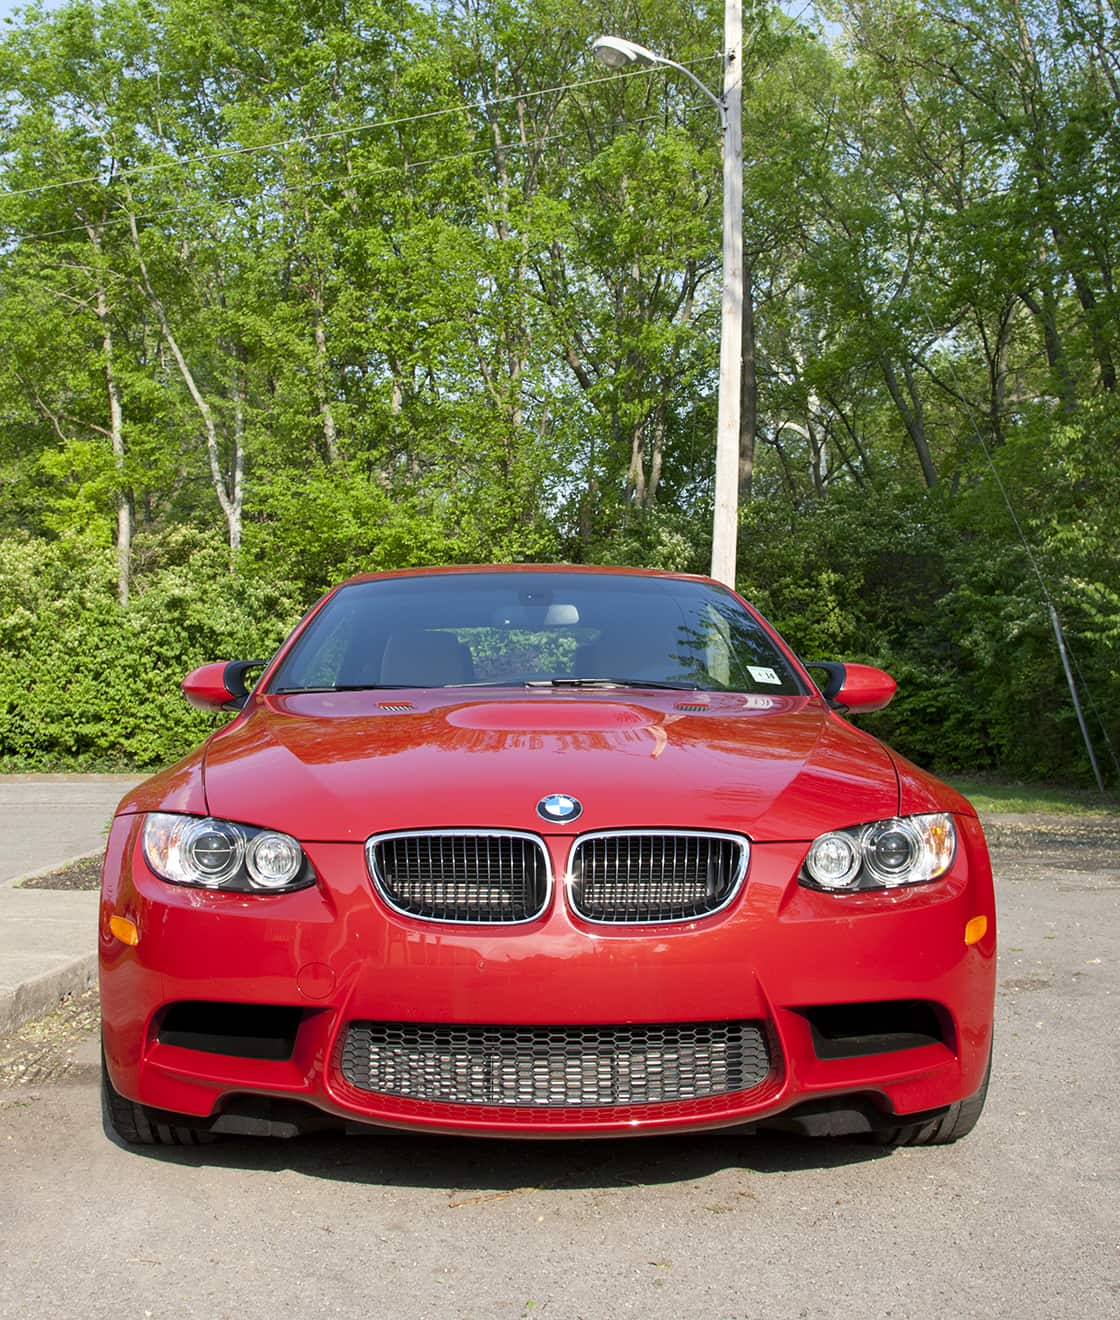 Red BMW at the park